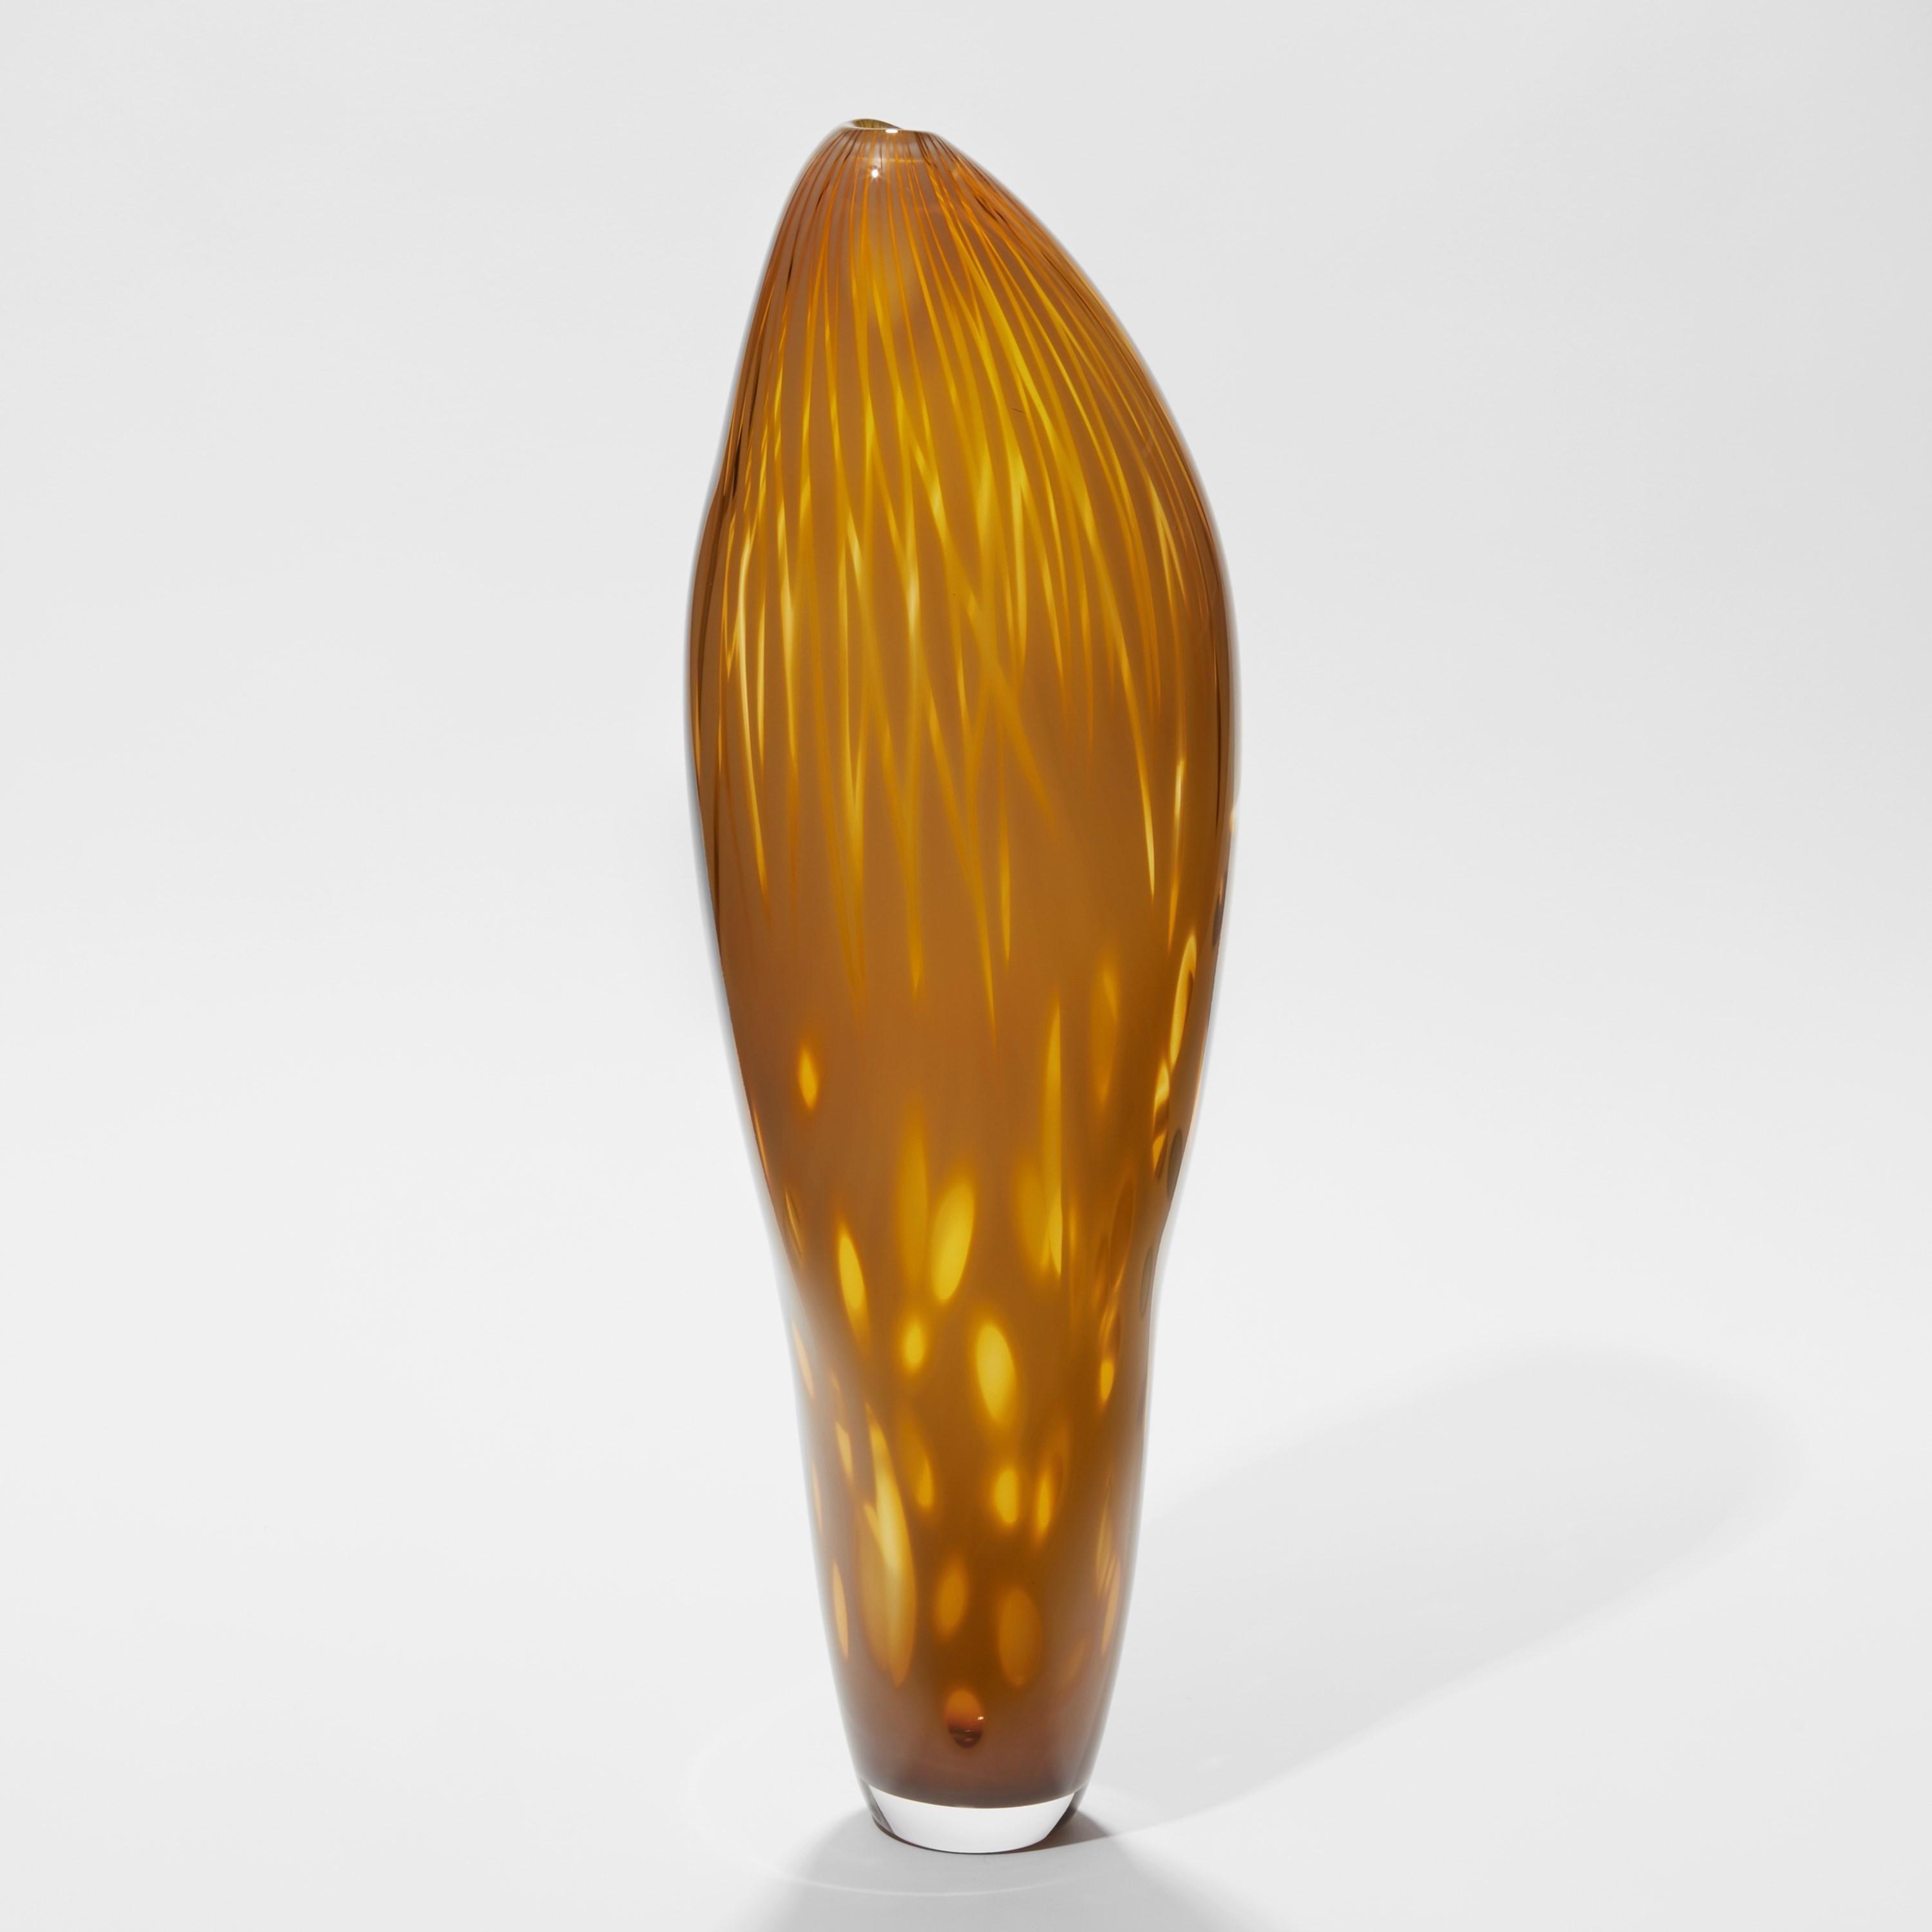 'Golden Hibiscus' is a unique glass artwork by the Canadian artist, Michèle Oberdieck.

Michèle Oberdieck explores balance and asymmetry through colour, form and surface decoration. Presenting her sculptural works as a gesture, an expressive mark,